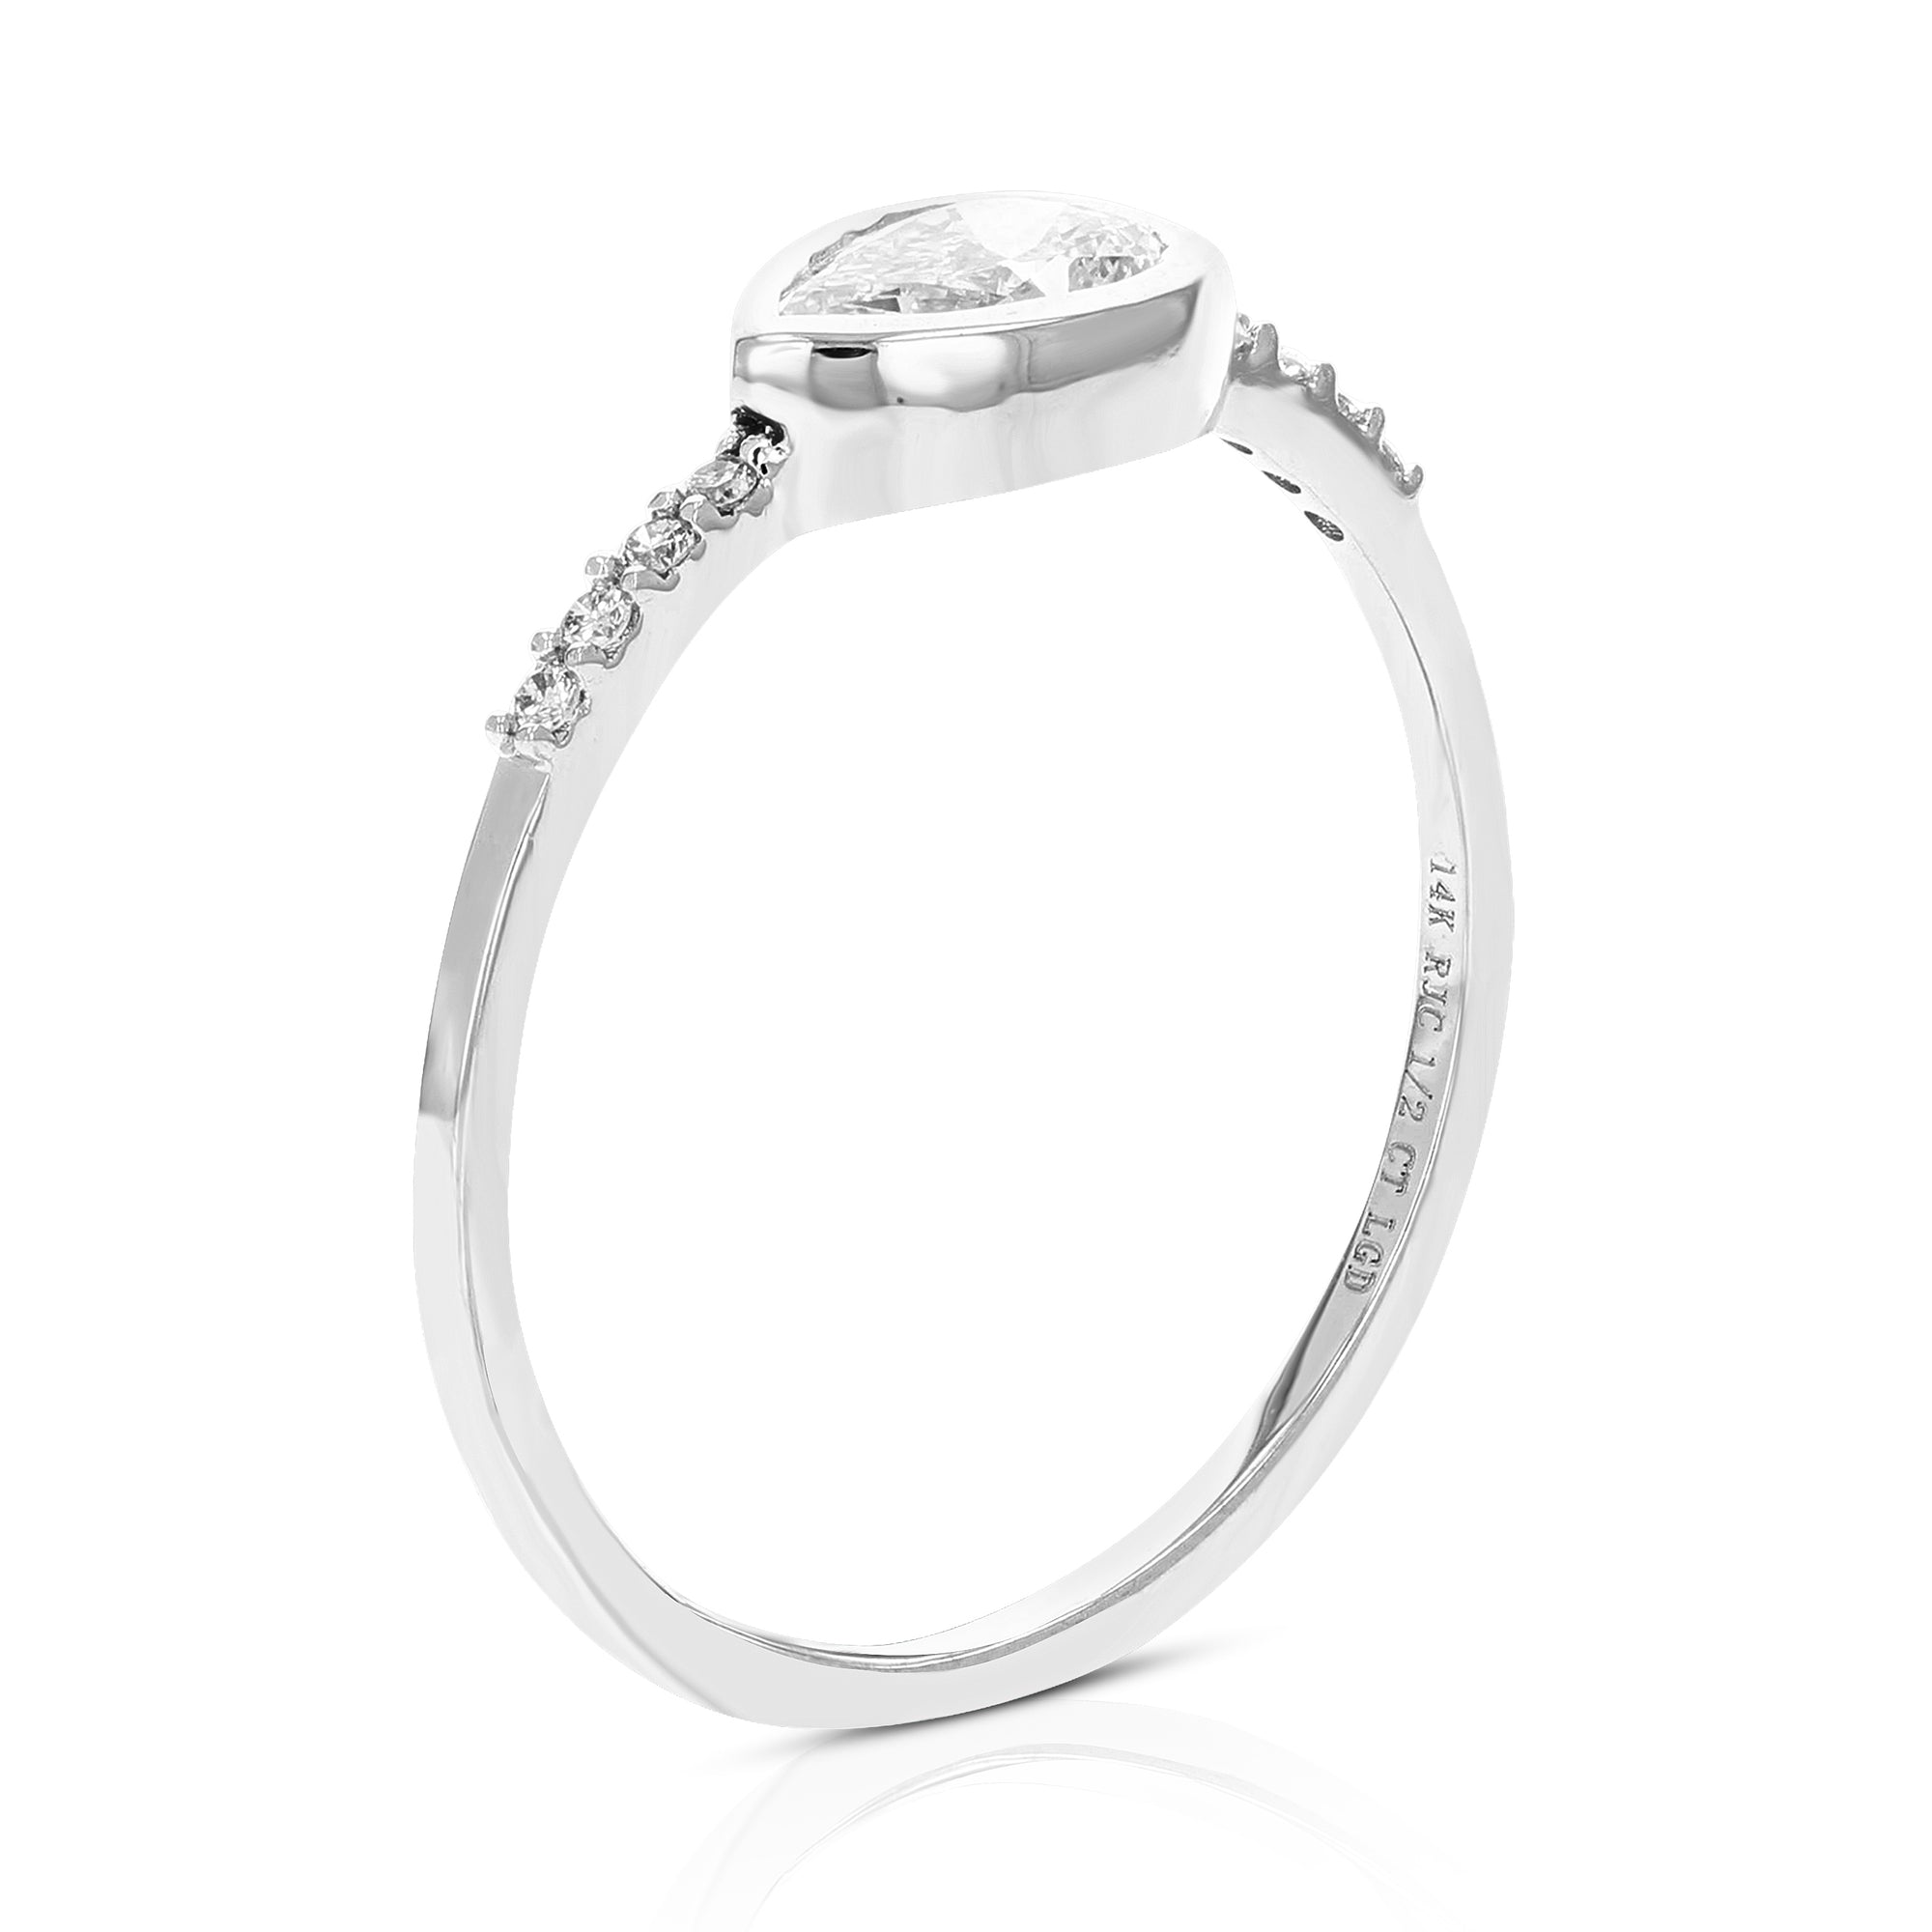 1/2 cttw Wedding Engagement Ring for Women, Round Lab Grown Diamond Ring in 14K White Gold, Prong Setting